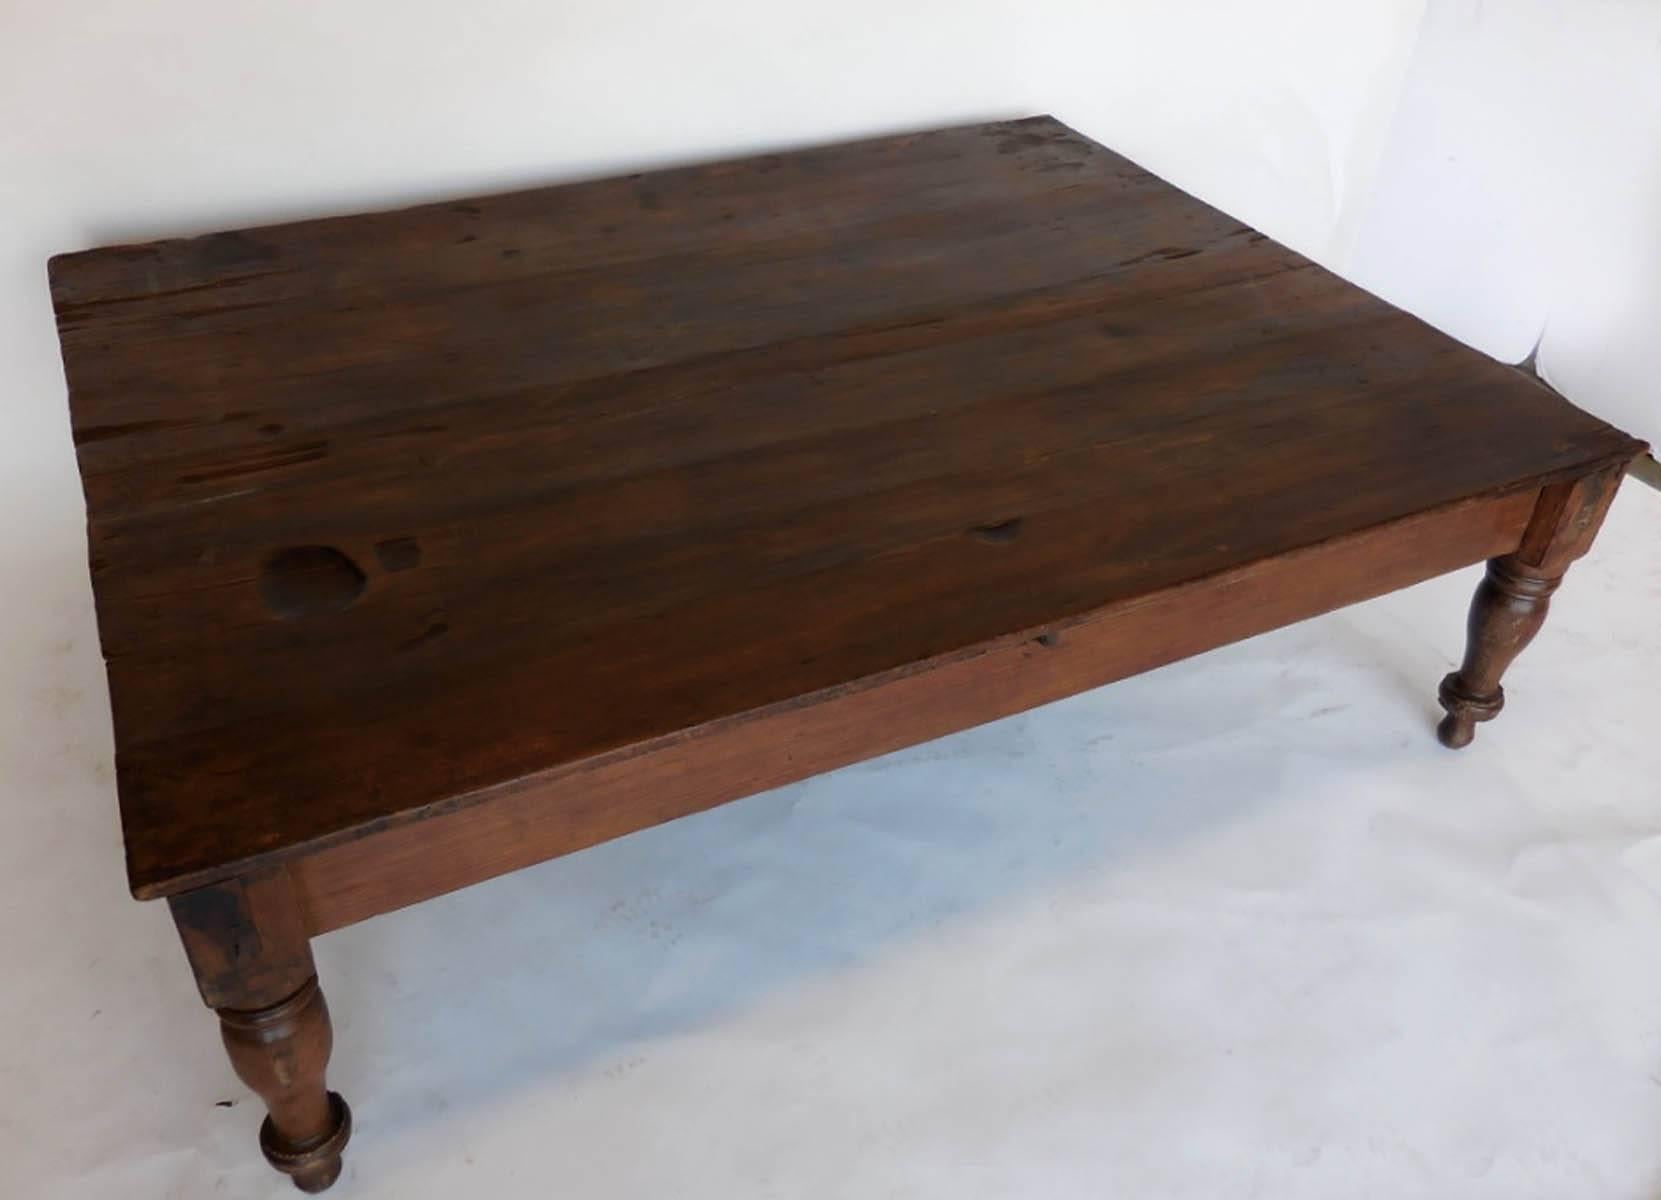 Rustic 19th Century Bed or Coffee Table